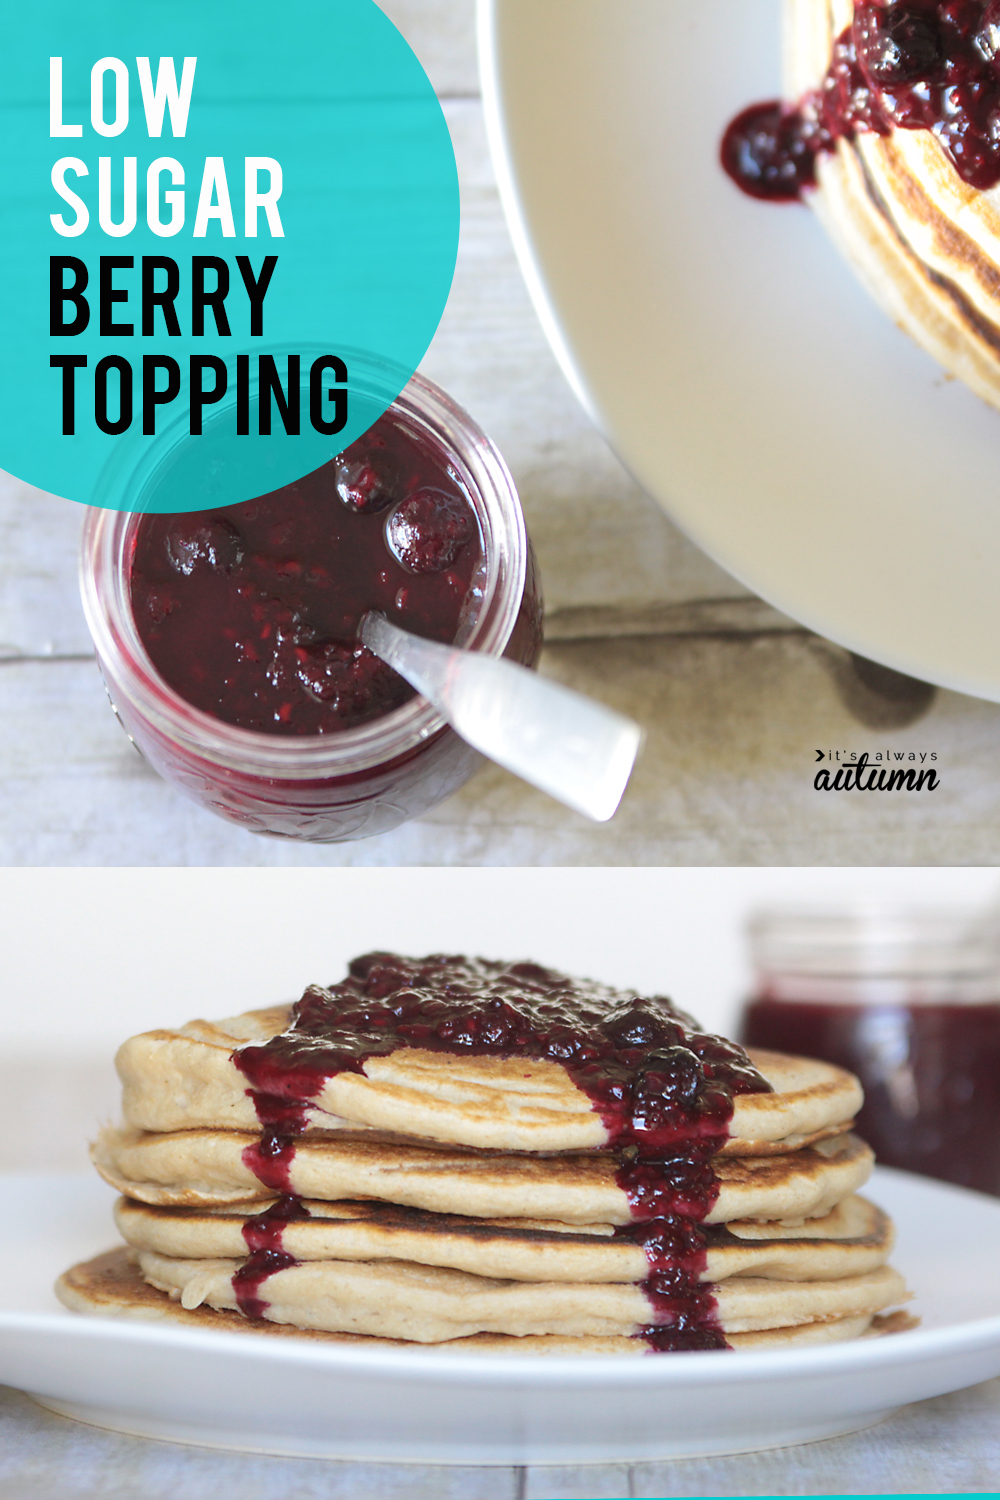 This triple berry pancake topping is low in sugar and calories and tastes delicious!